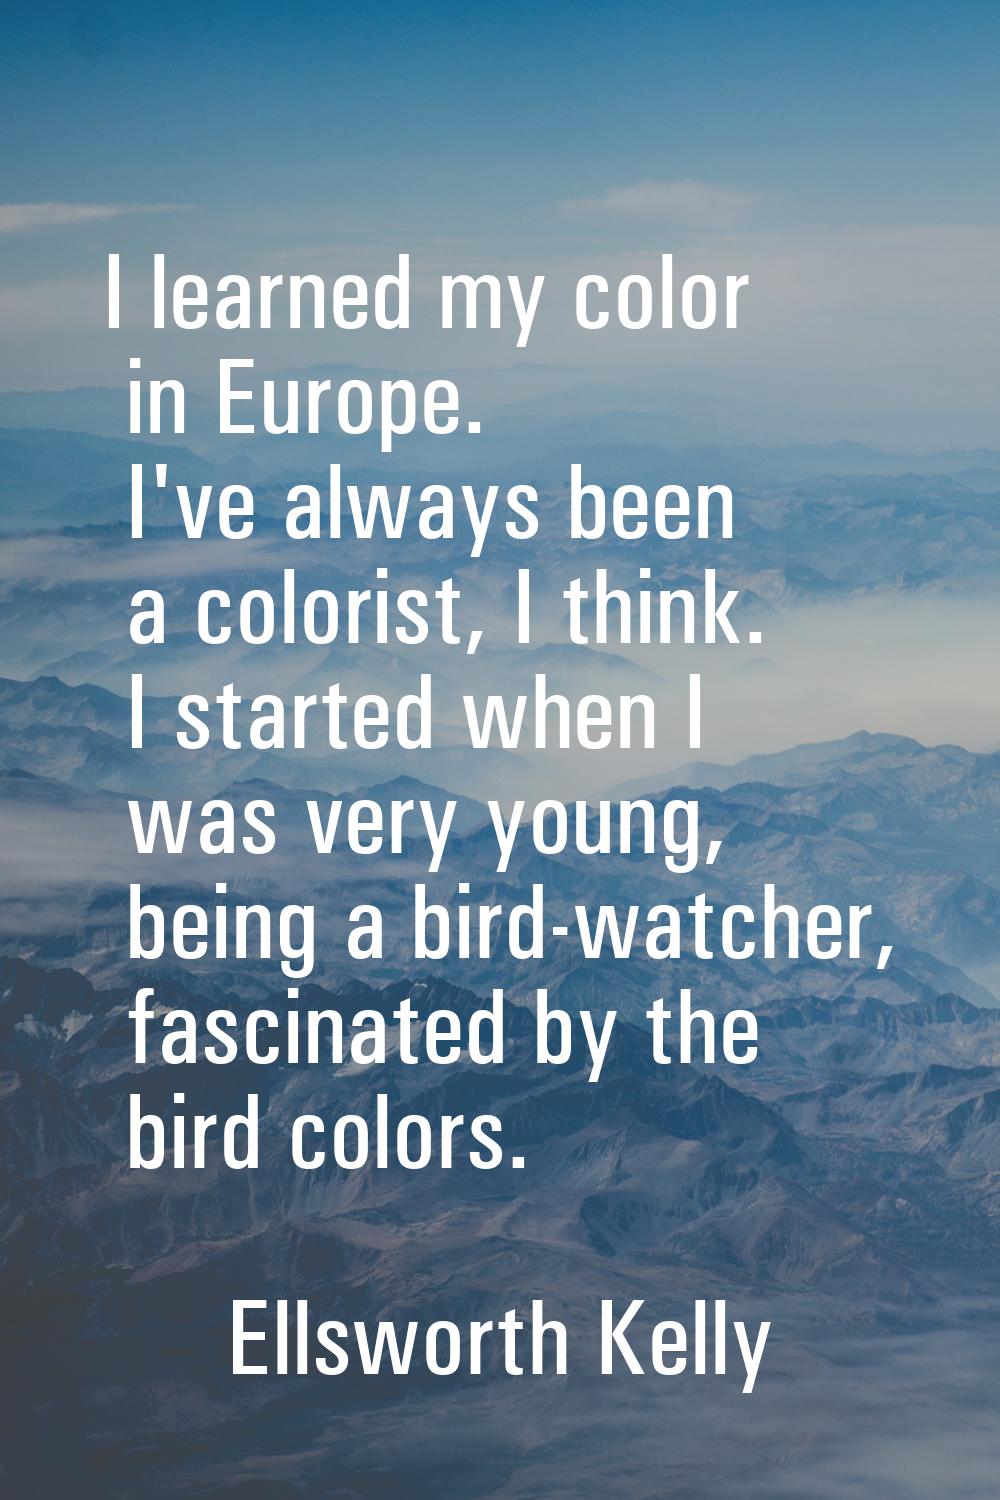 I learned my color in Europe. I've always been a colorist, I think. I started when I was very young